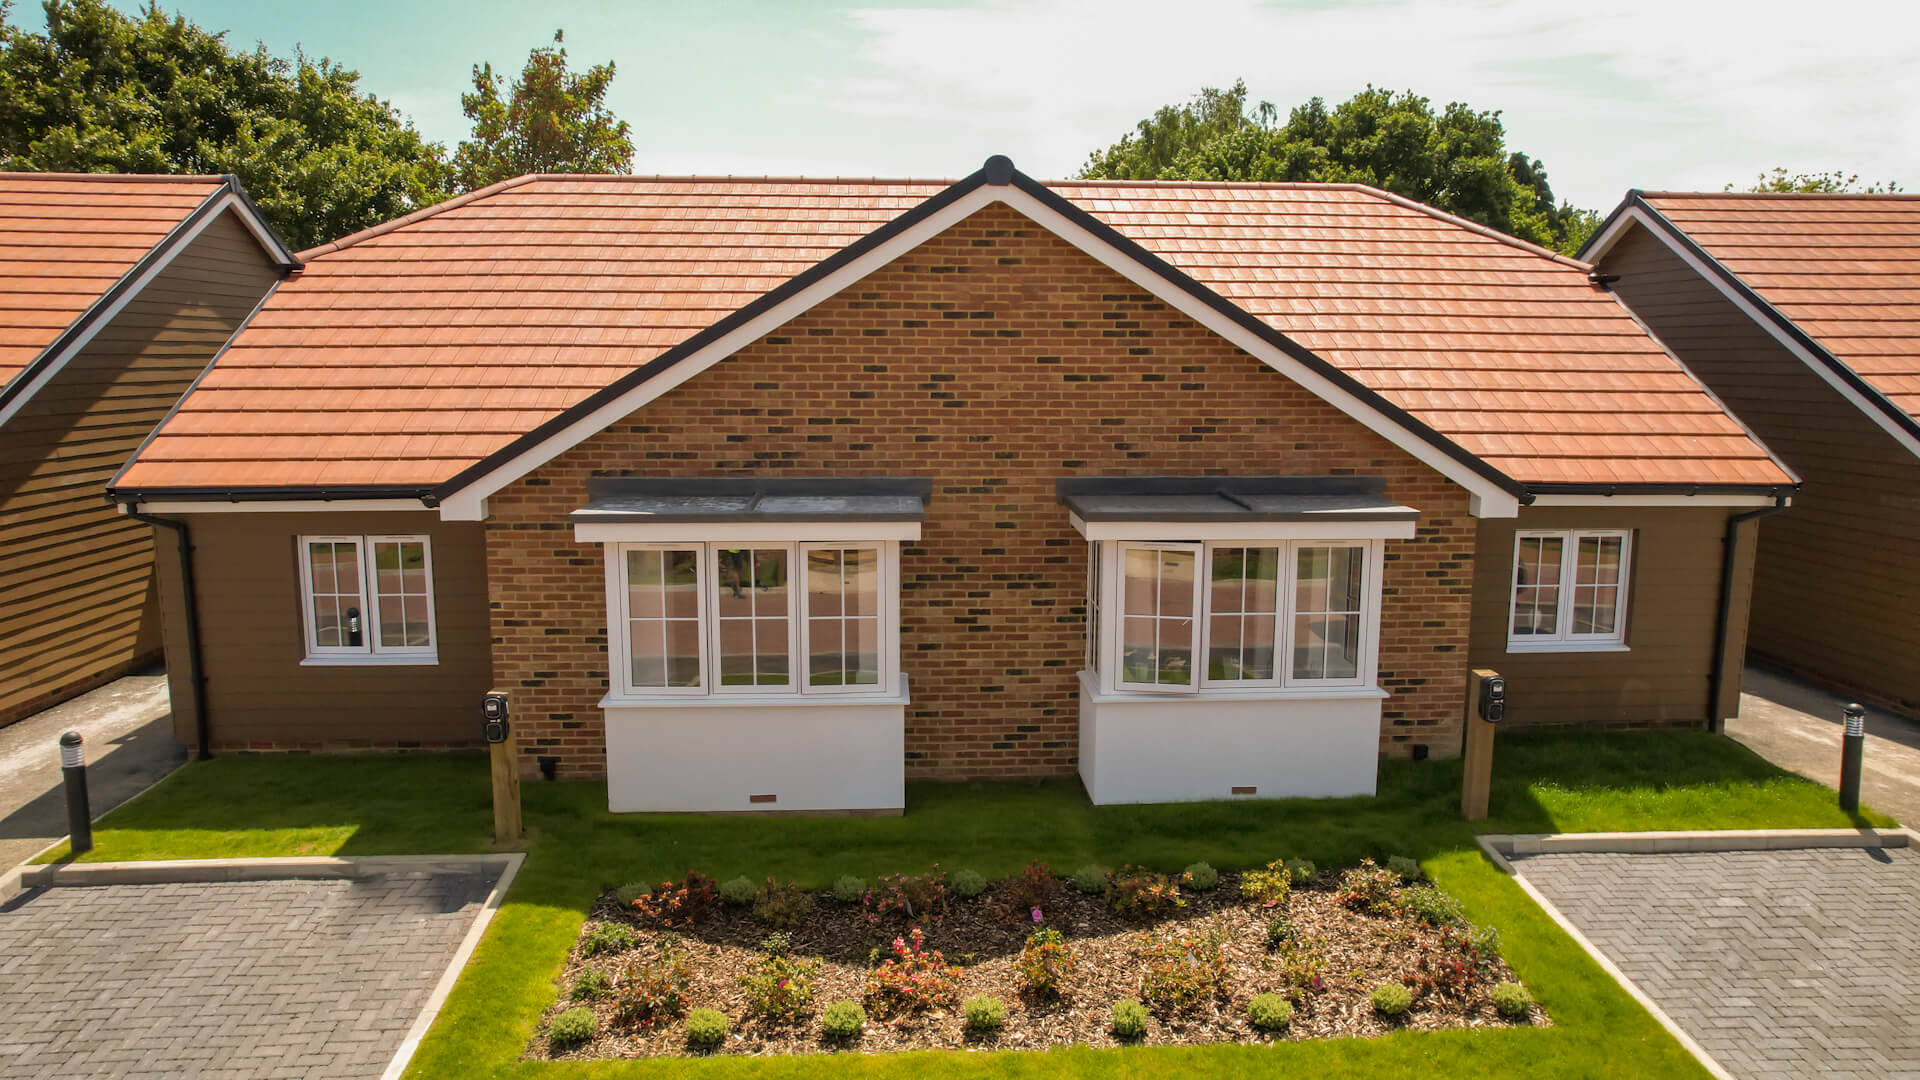 Plot 19 and 20 at the heart of Cobnut Park